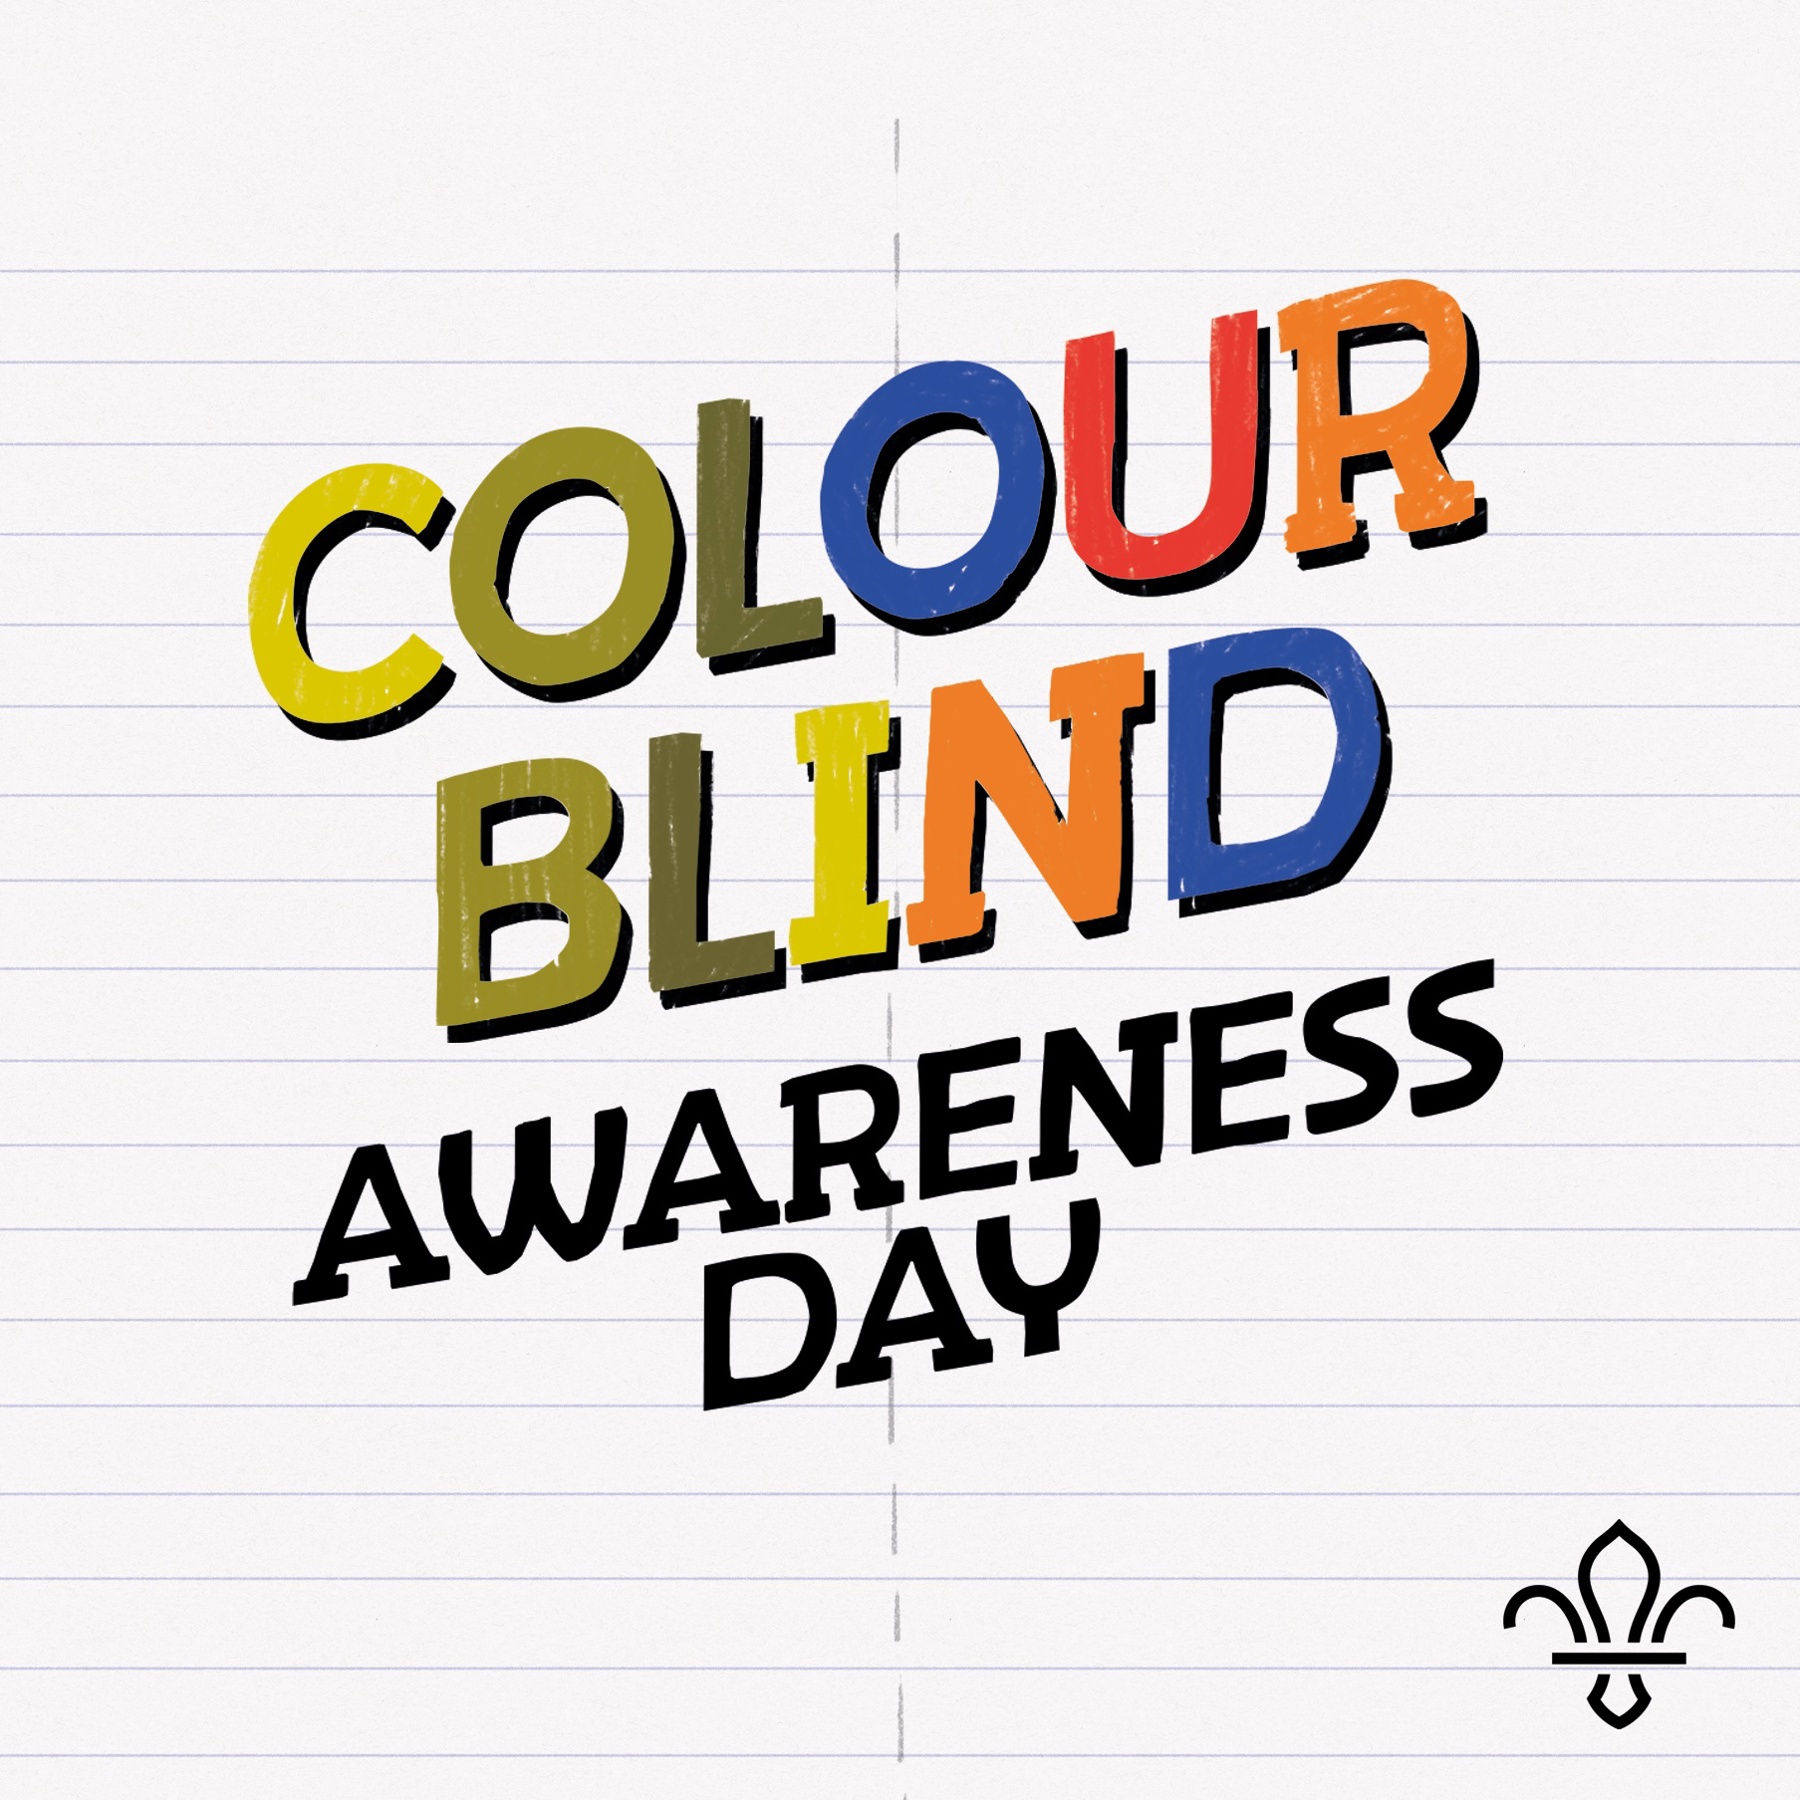 The words 'Colour Blind Awareness Day' are appearing slanted on white lined paper. On the first three letters of both 'Colour' and 'Blind,' the colours appear how someone with colour blindness would see them. Then, the last letters are how someone without colour blindness would see blue, red, and orange. The words 'Awareness Day' are in black underneath, and there's a black Fleur-de-Lis in the bottom right corner.